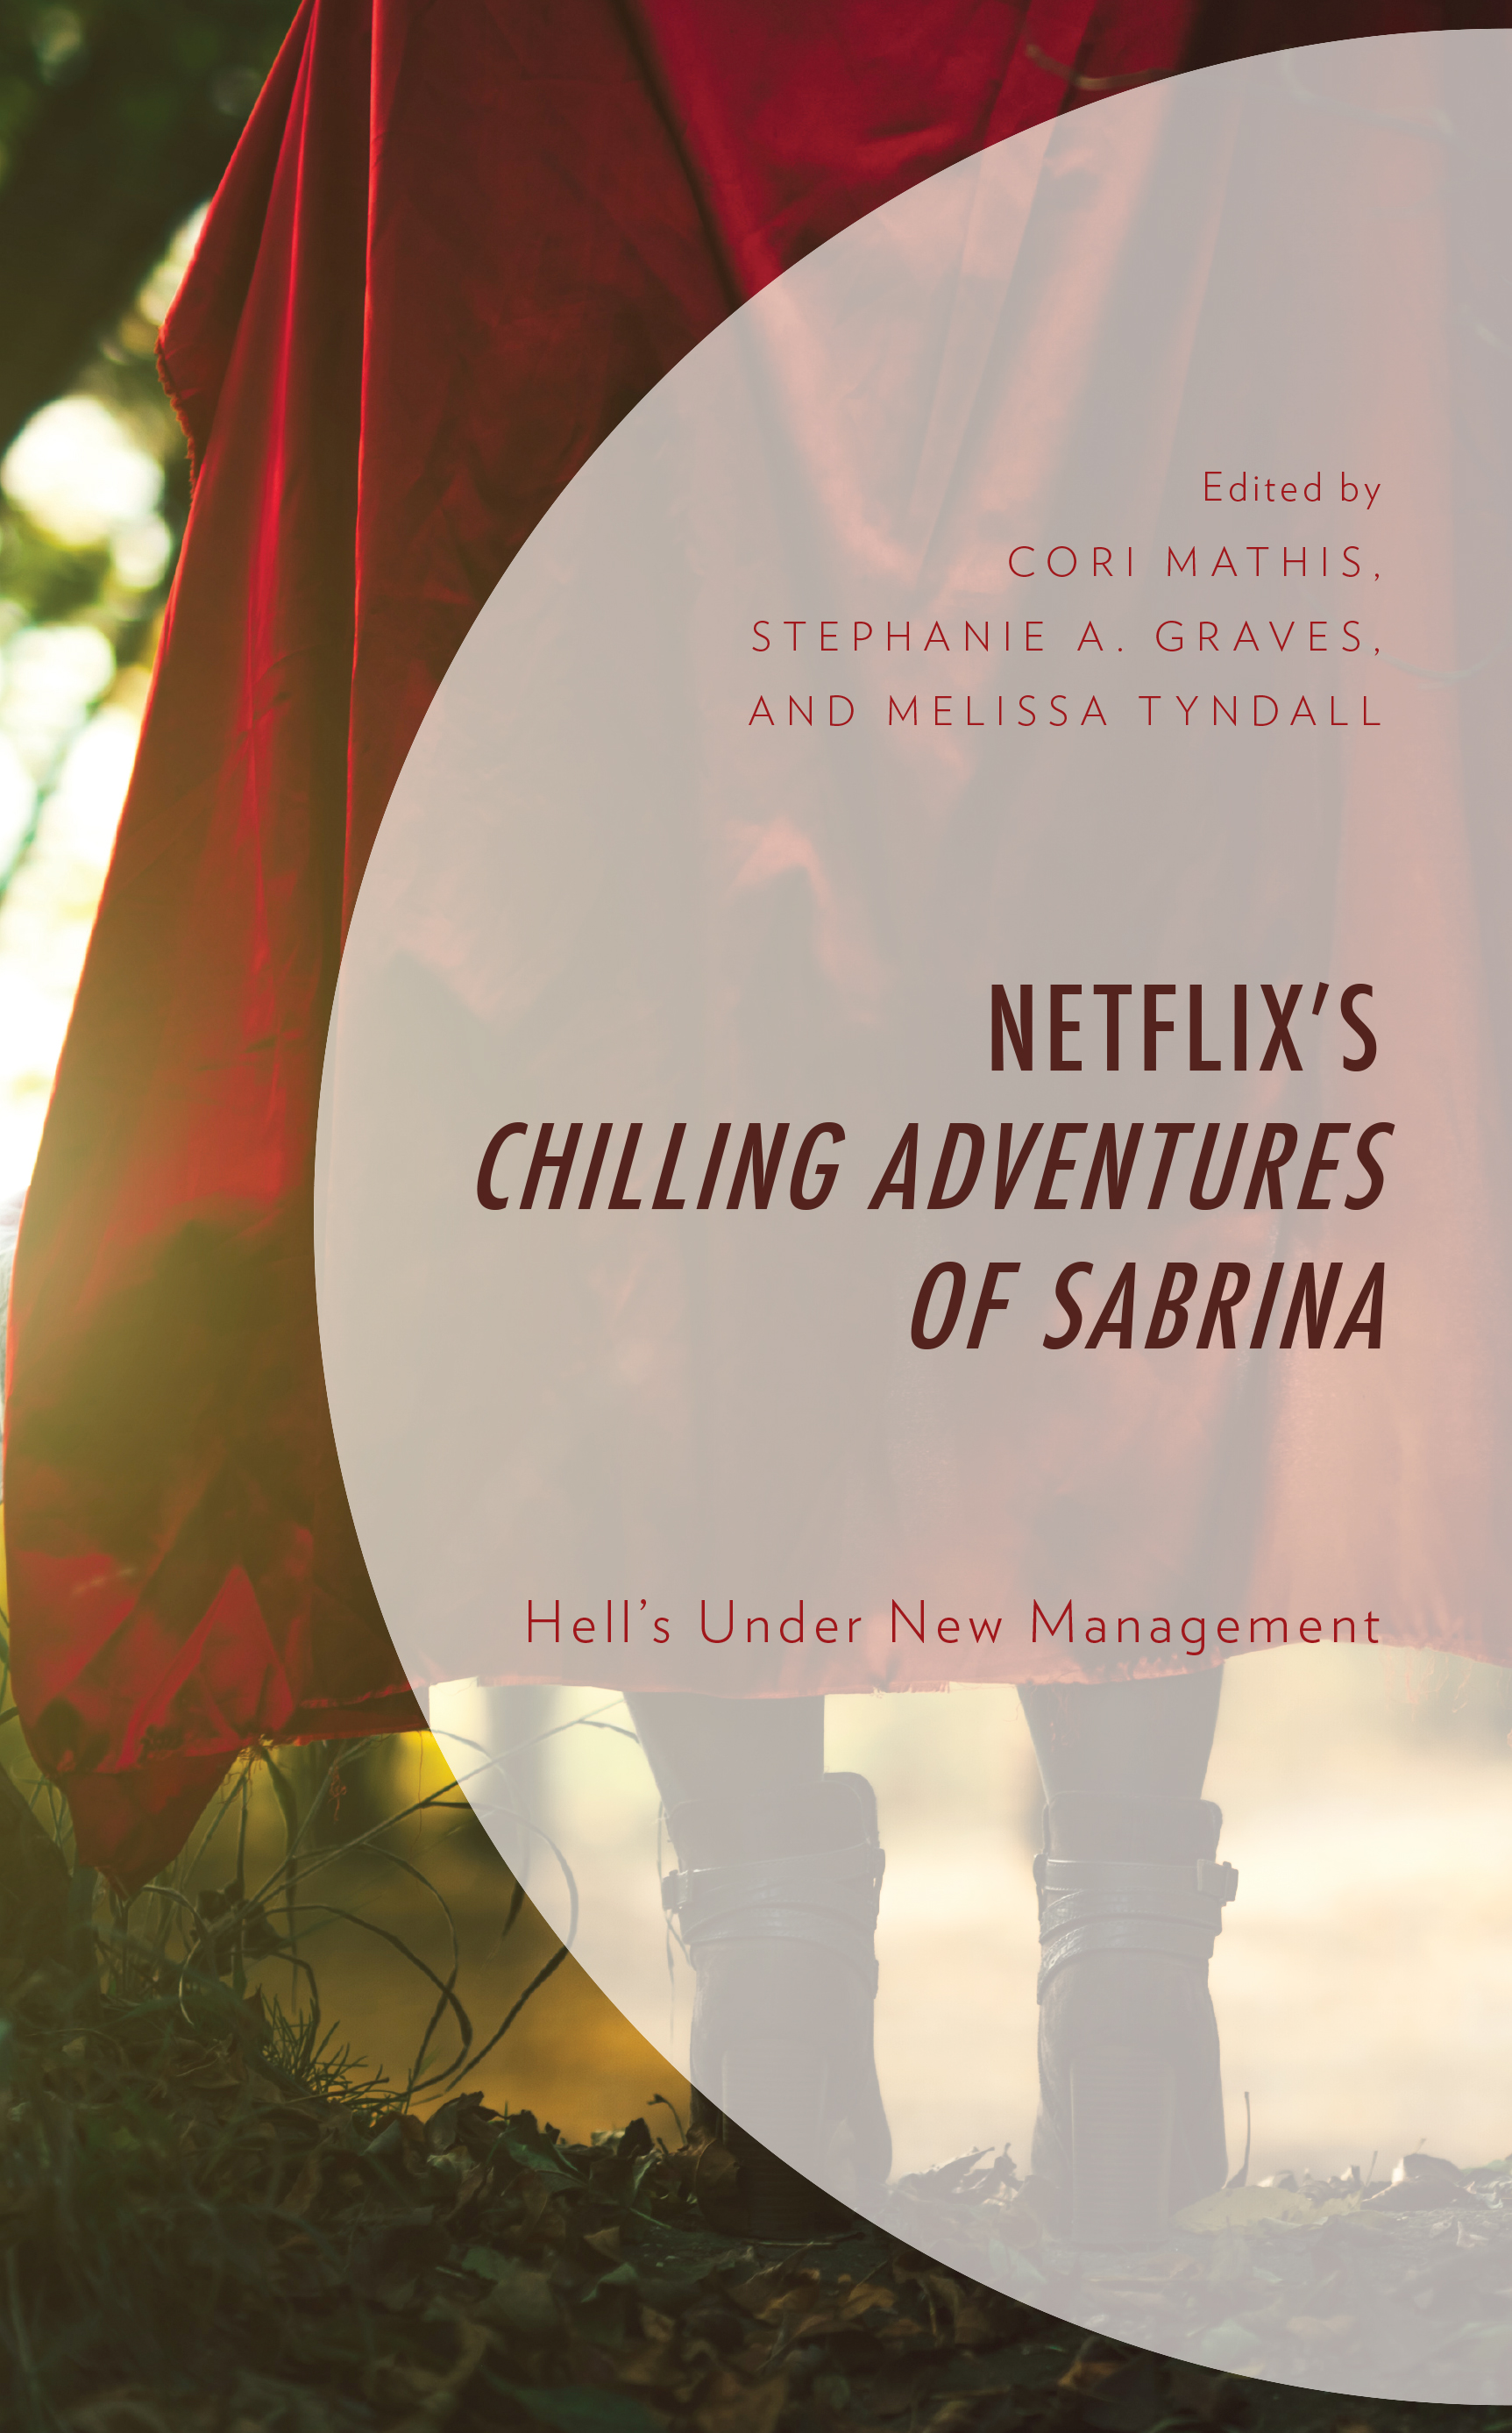 Netflix’s Chilling Adventures of Sabrina: Hell’s Under New Management